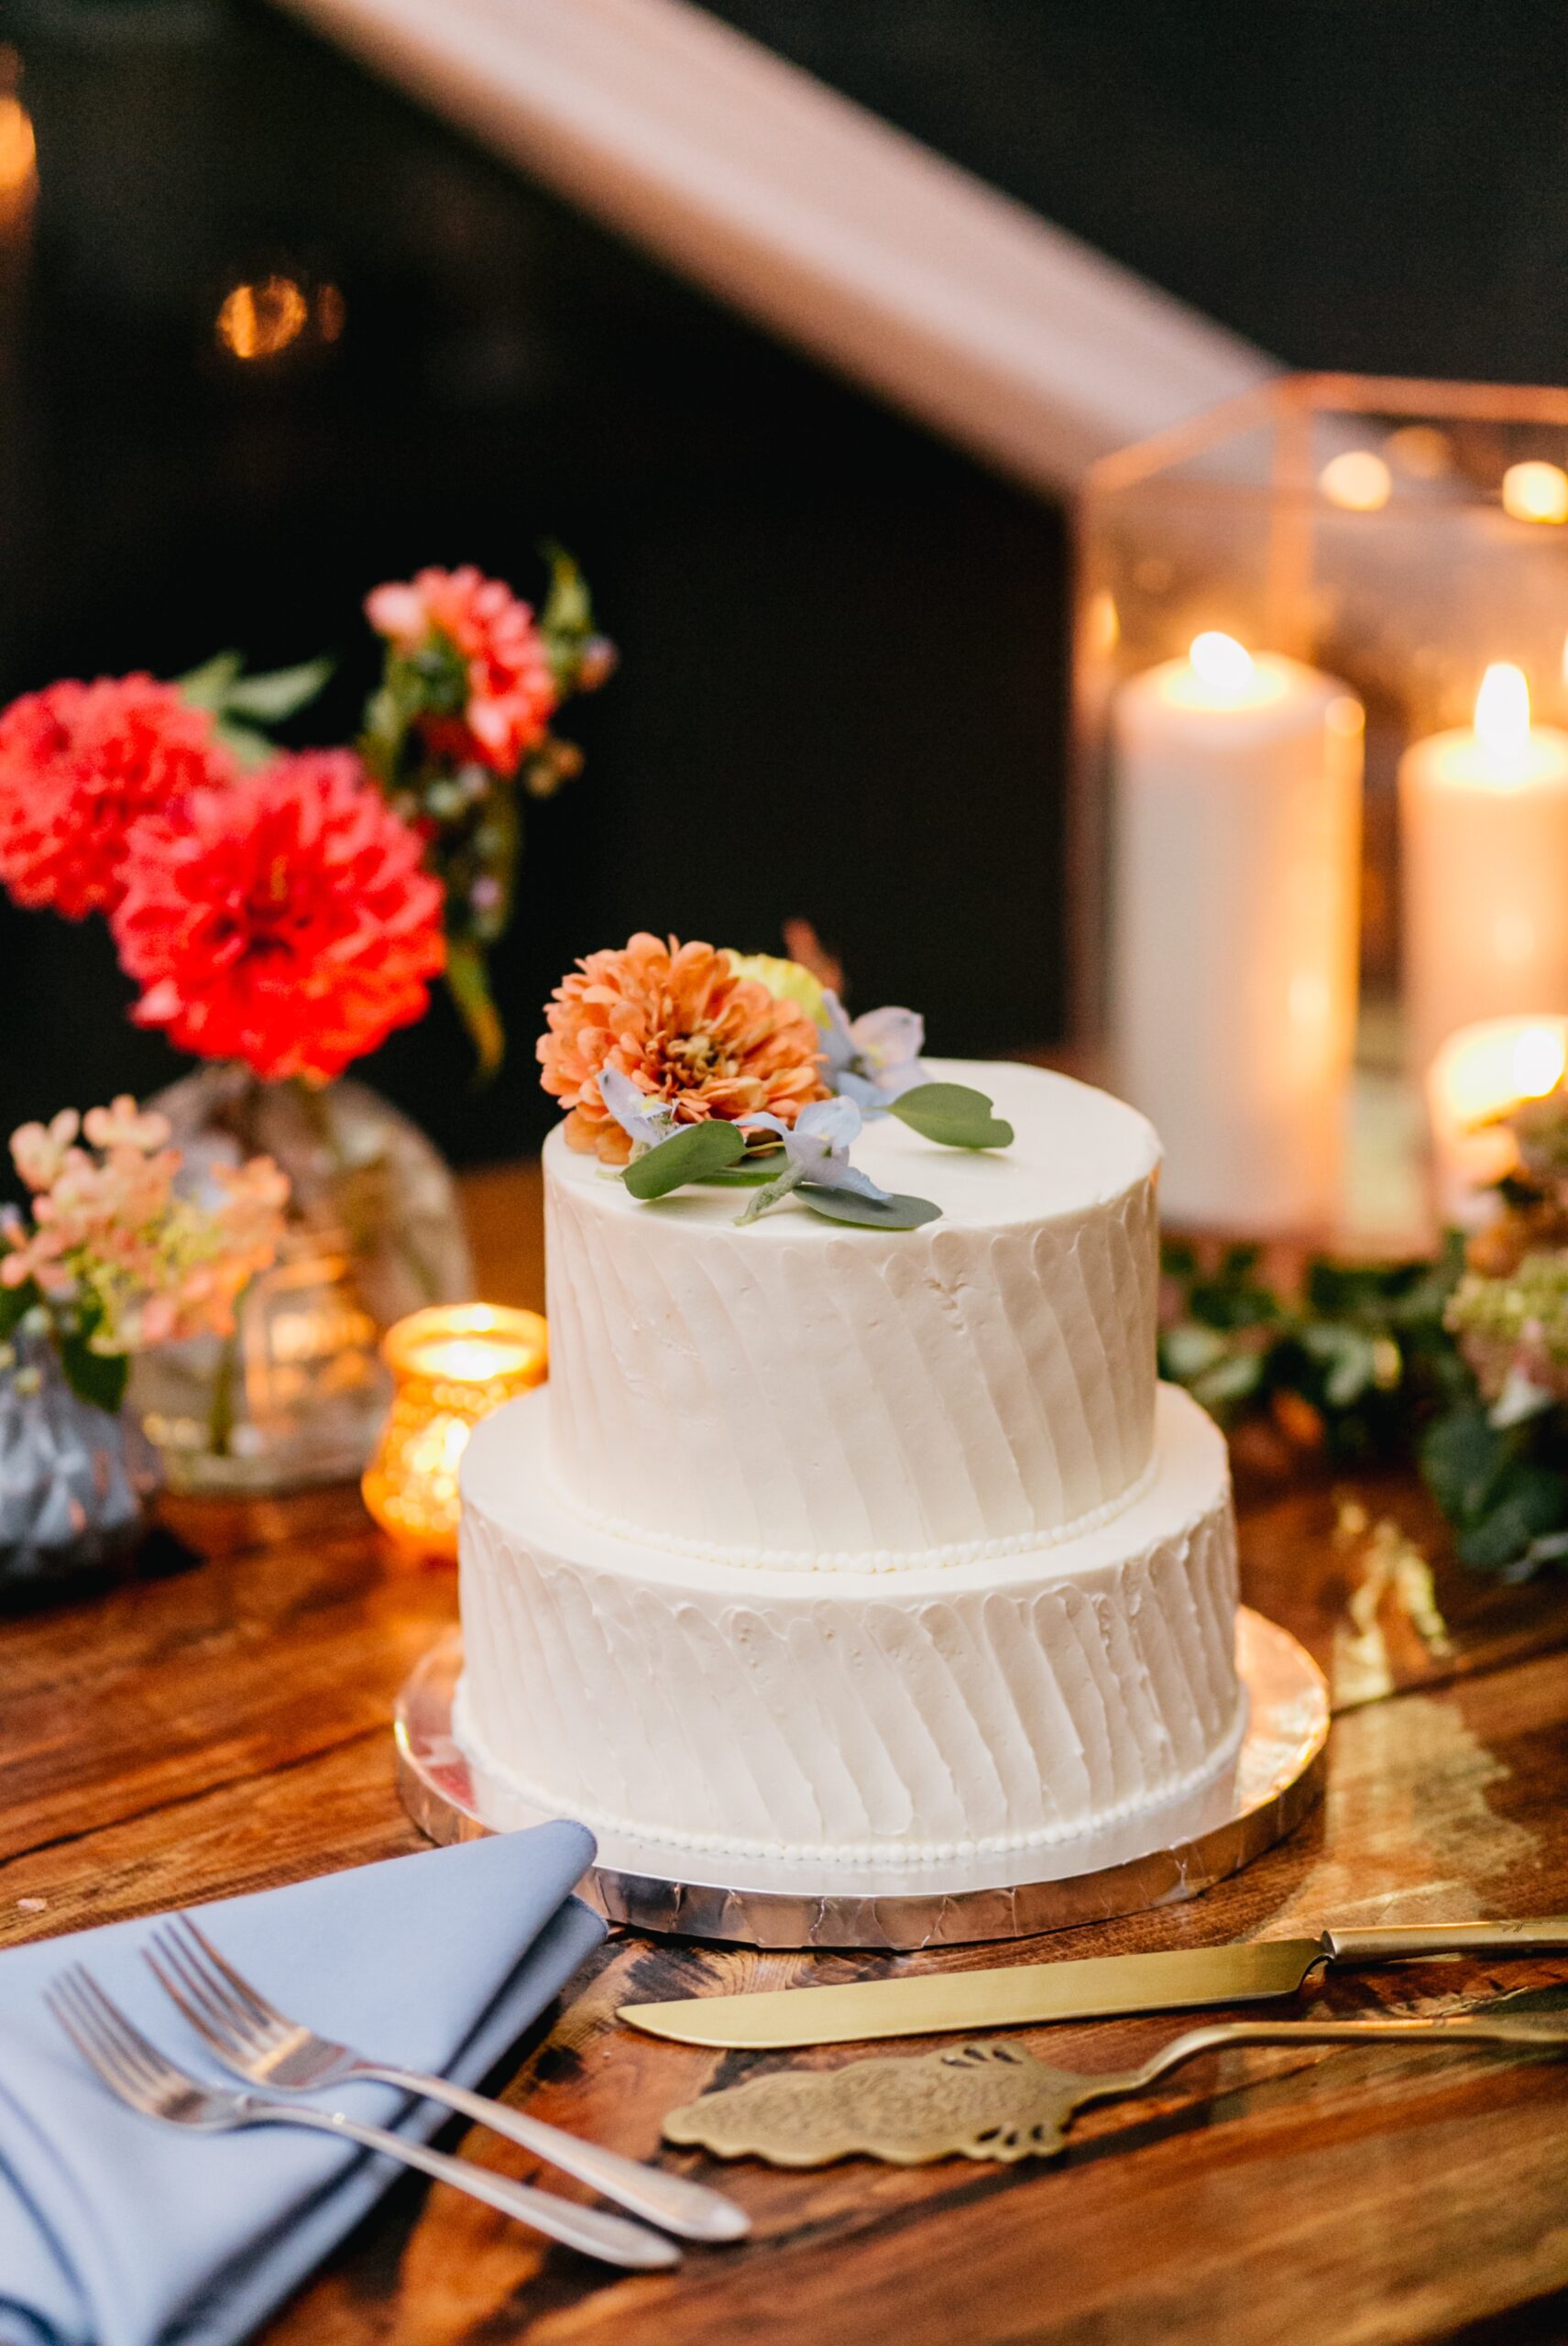 Simple wedding cake with bright flowers on top